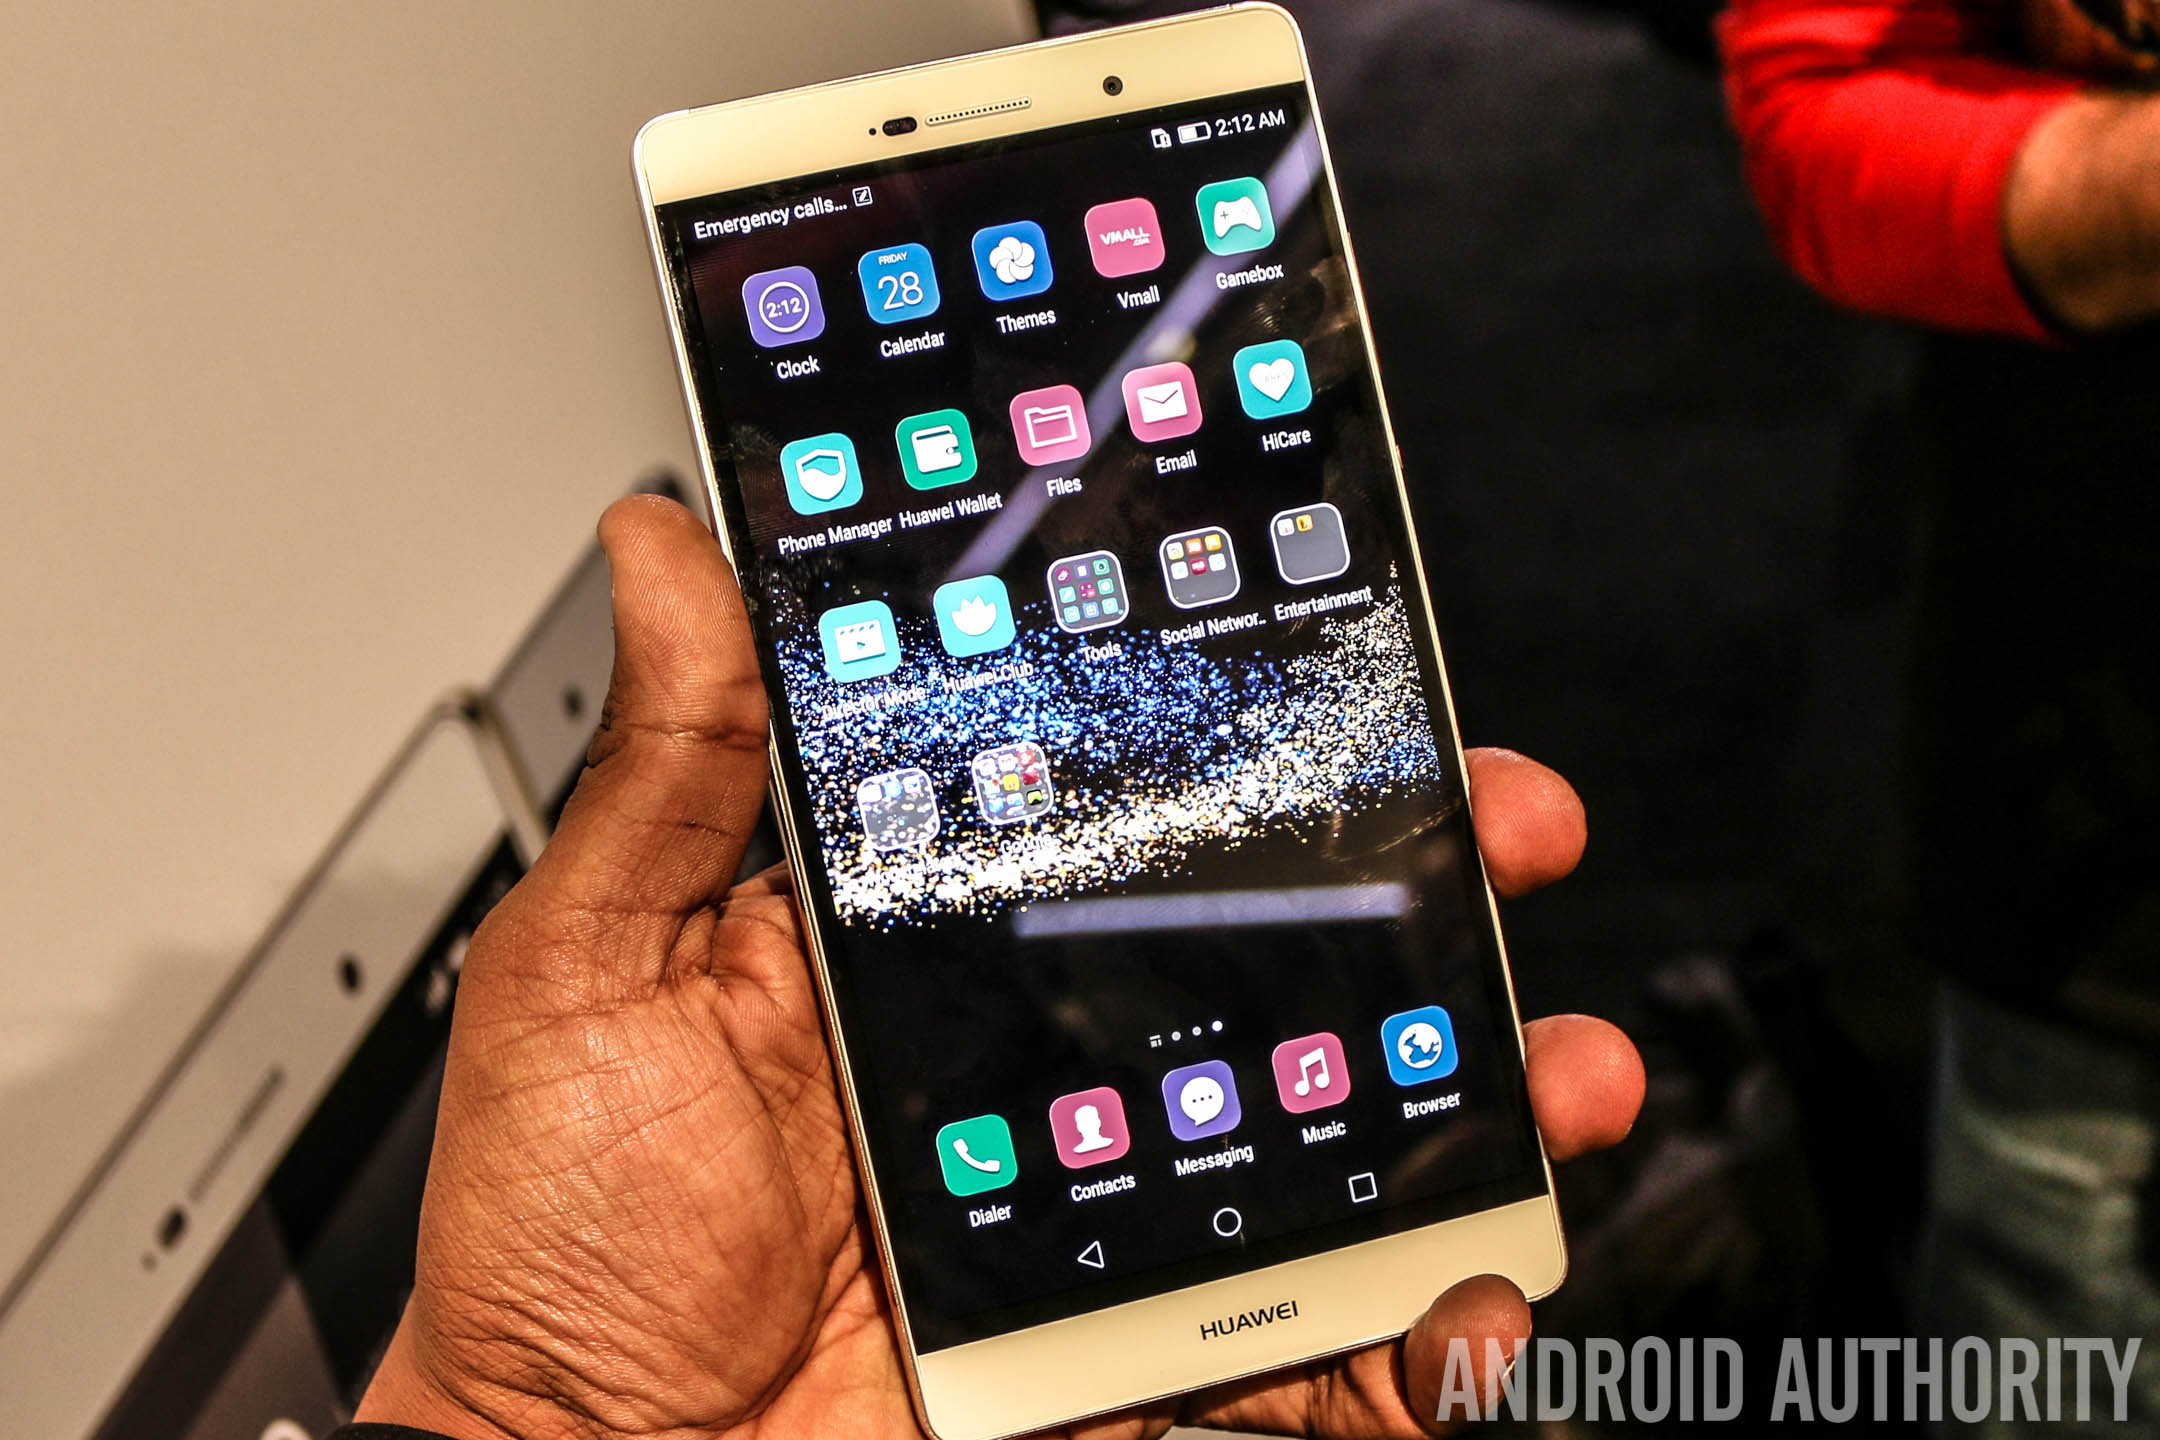 Bonus Fabel keuken Hands-on with the humongous Huawei P8 Max - Android Authority